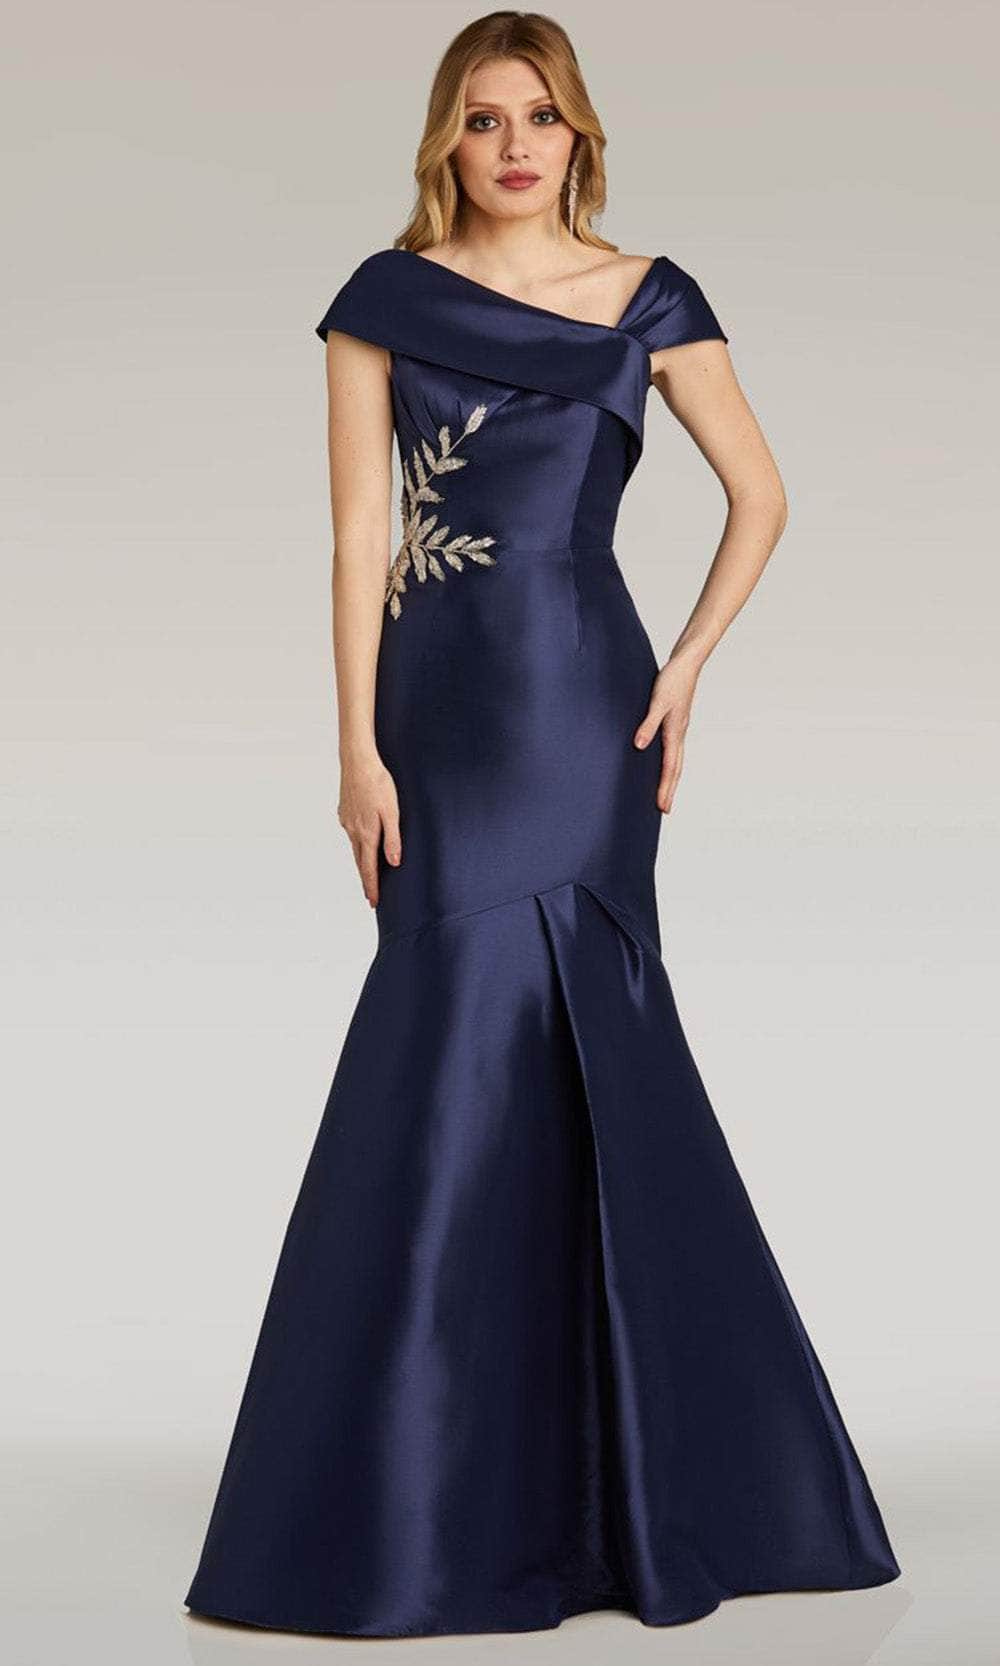 Feriani Couture 18268 - Cap Sleeve Mermaid Evening Gown Evening Dresses 2 / Navy